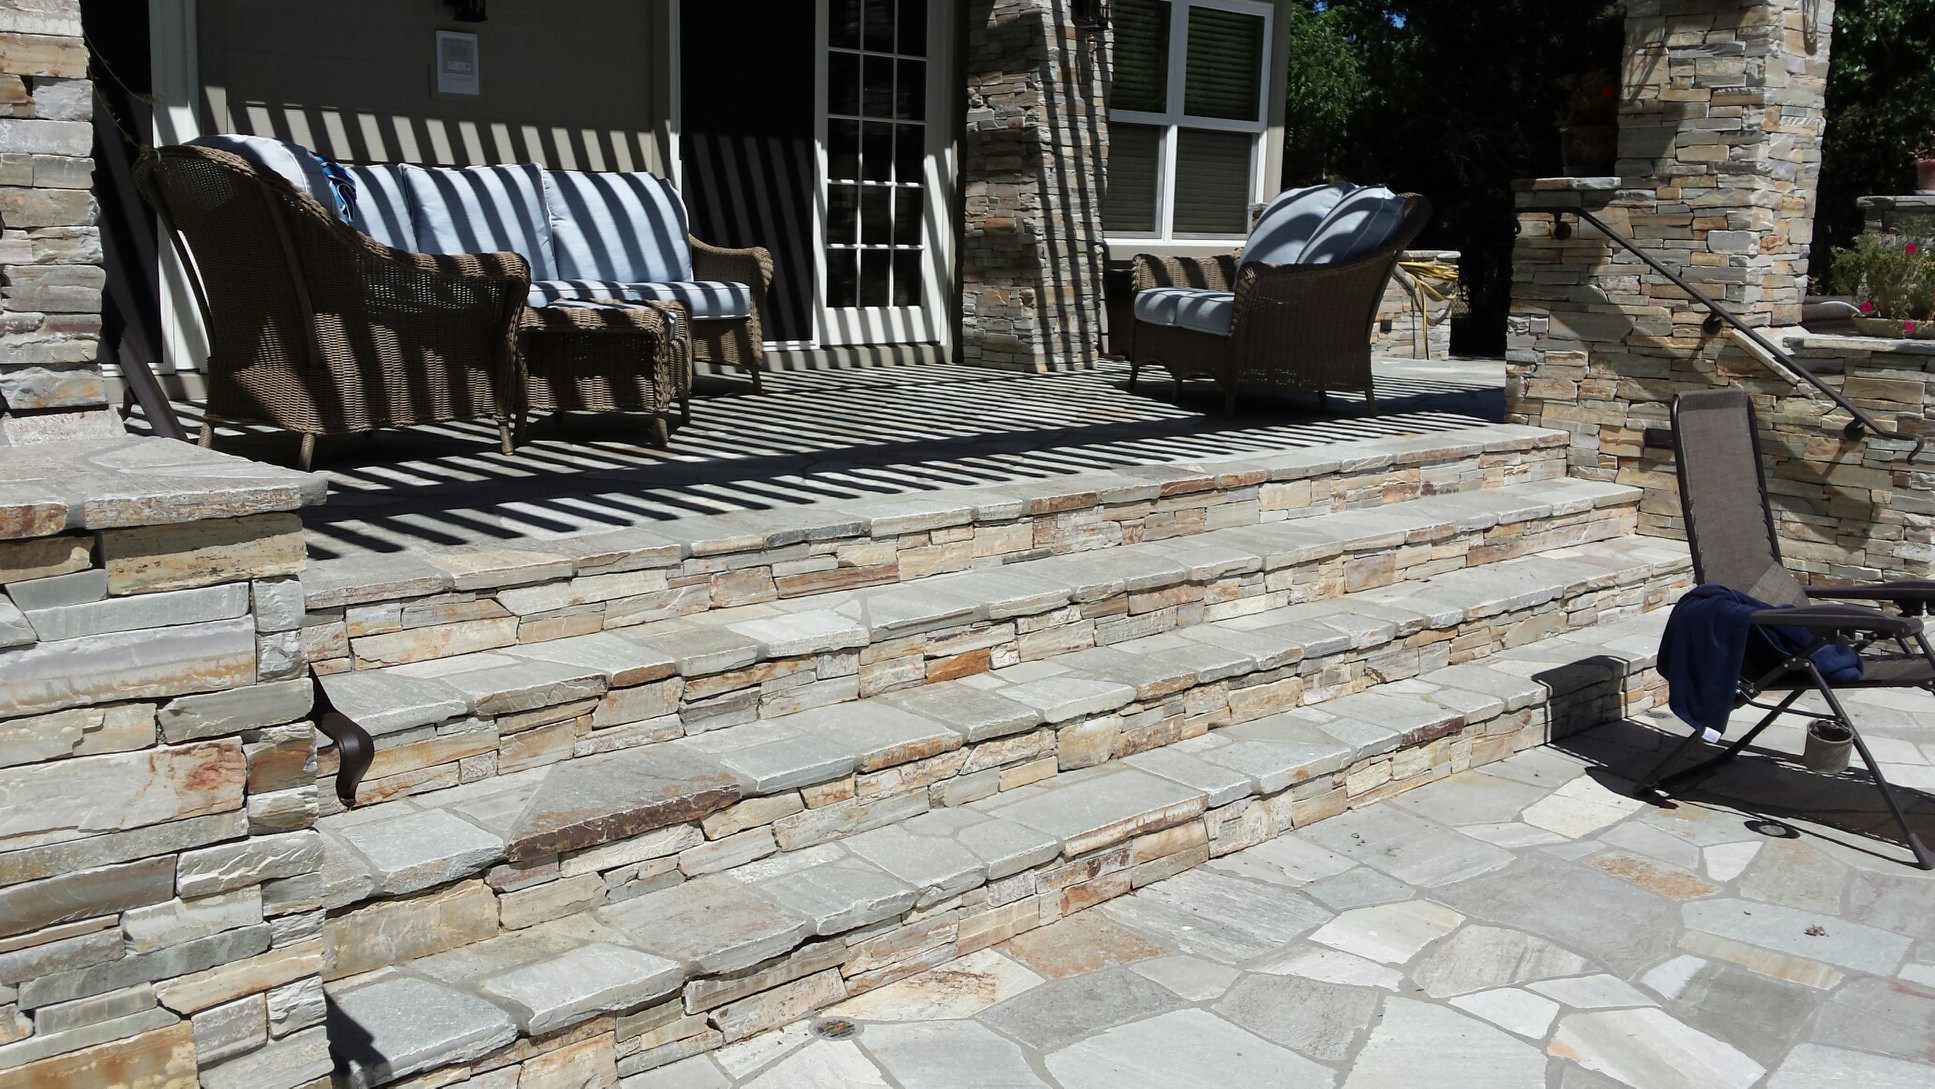 Another Patio